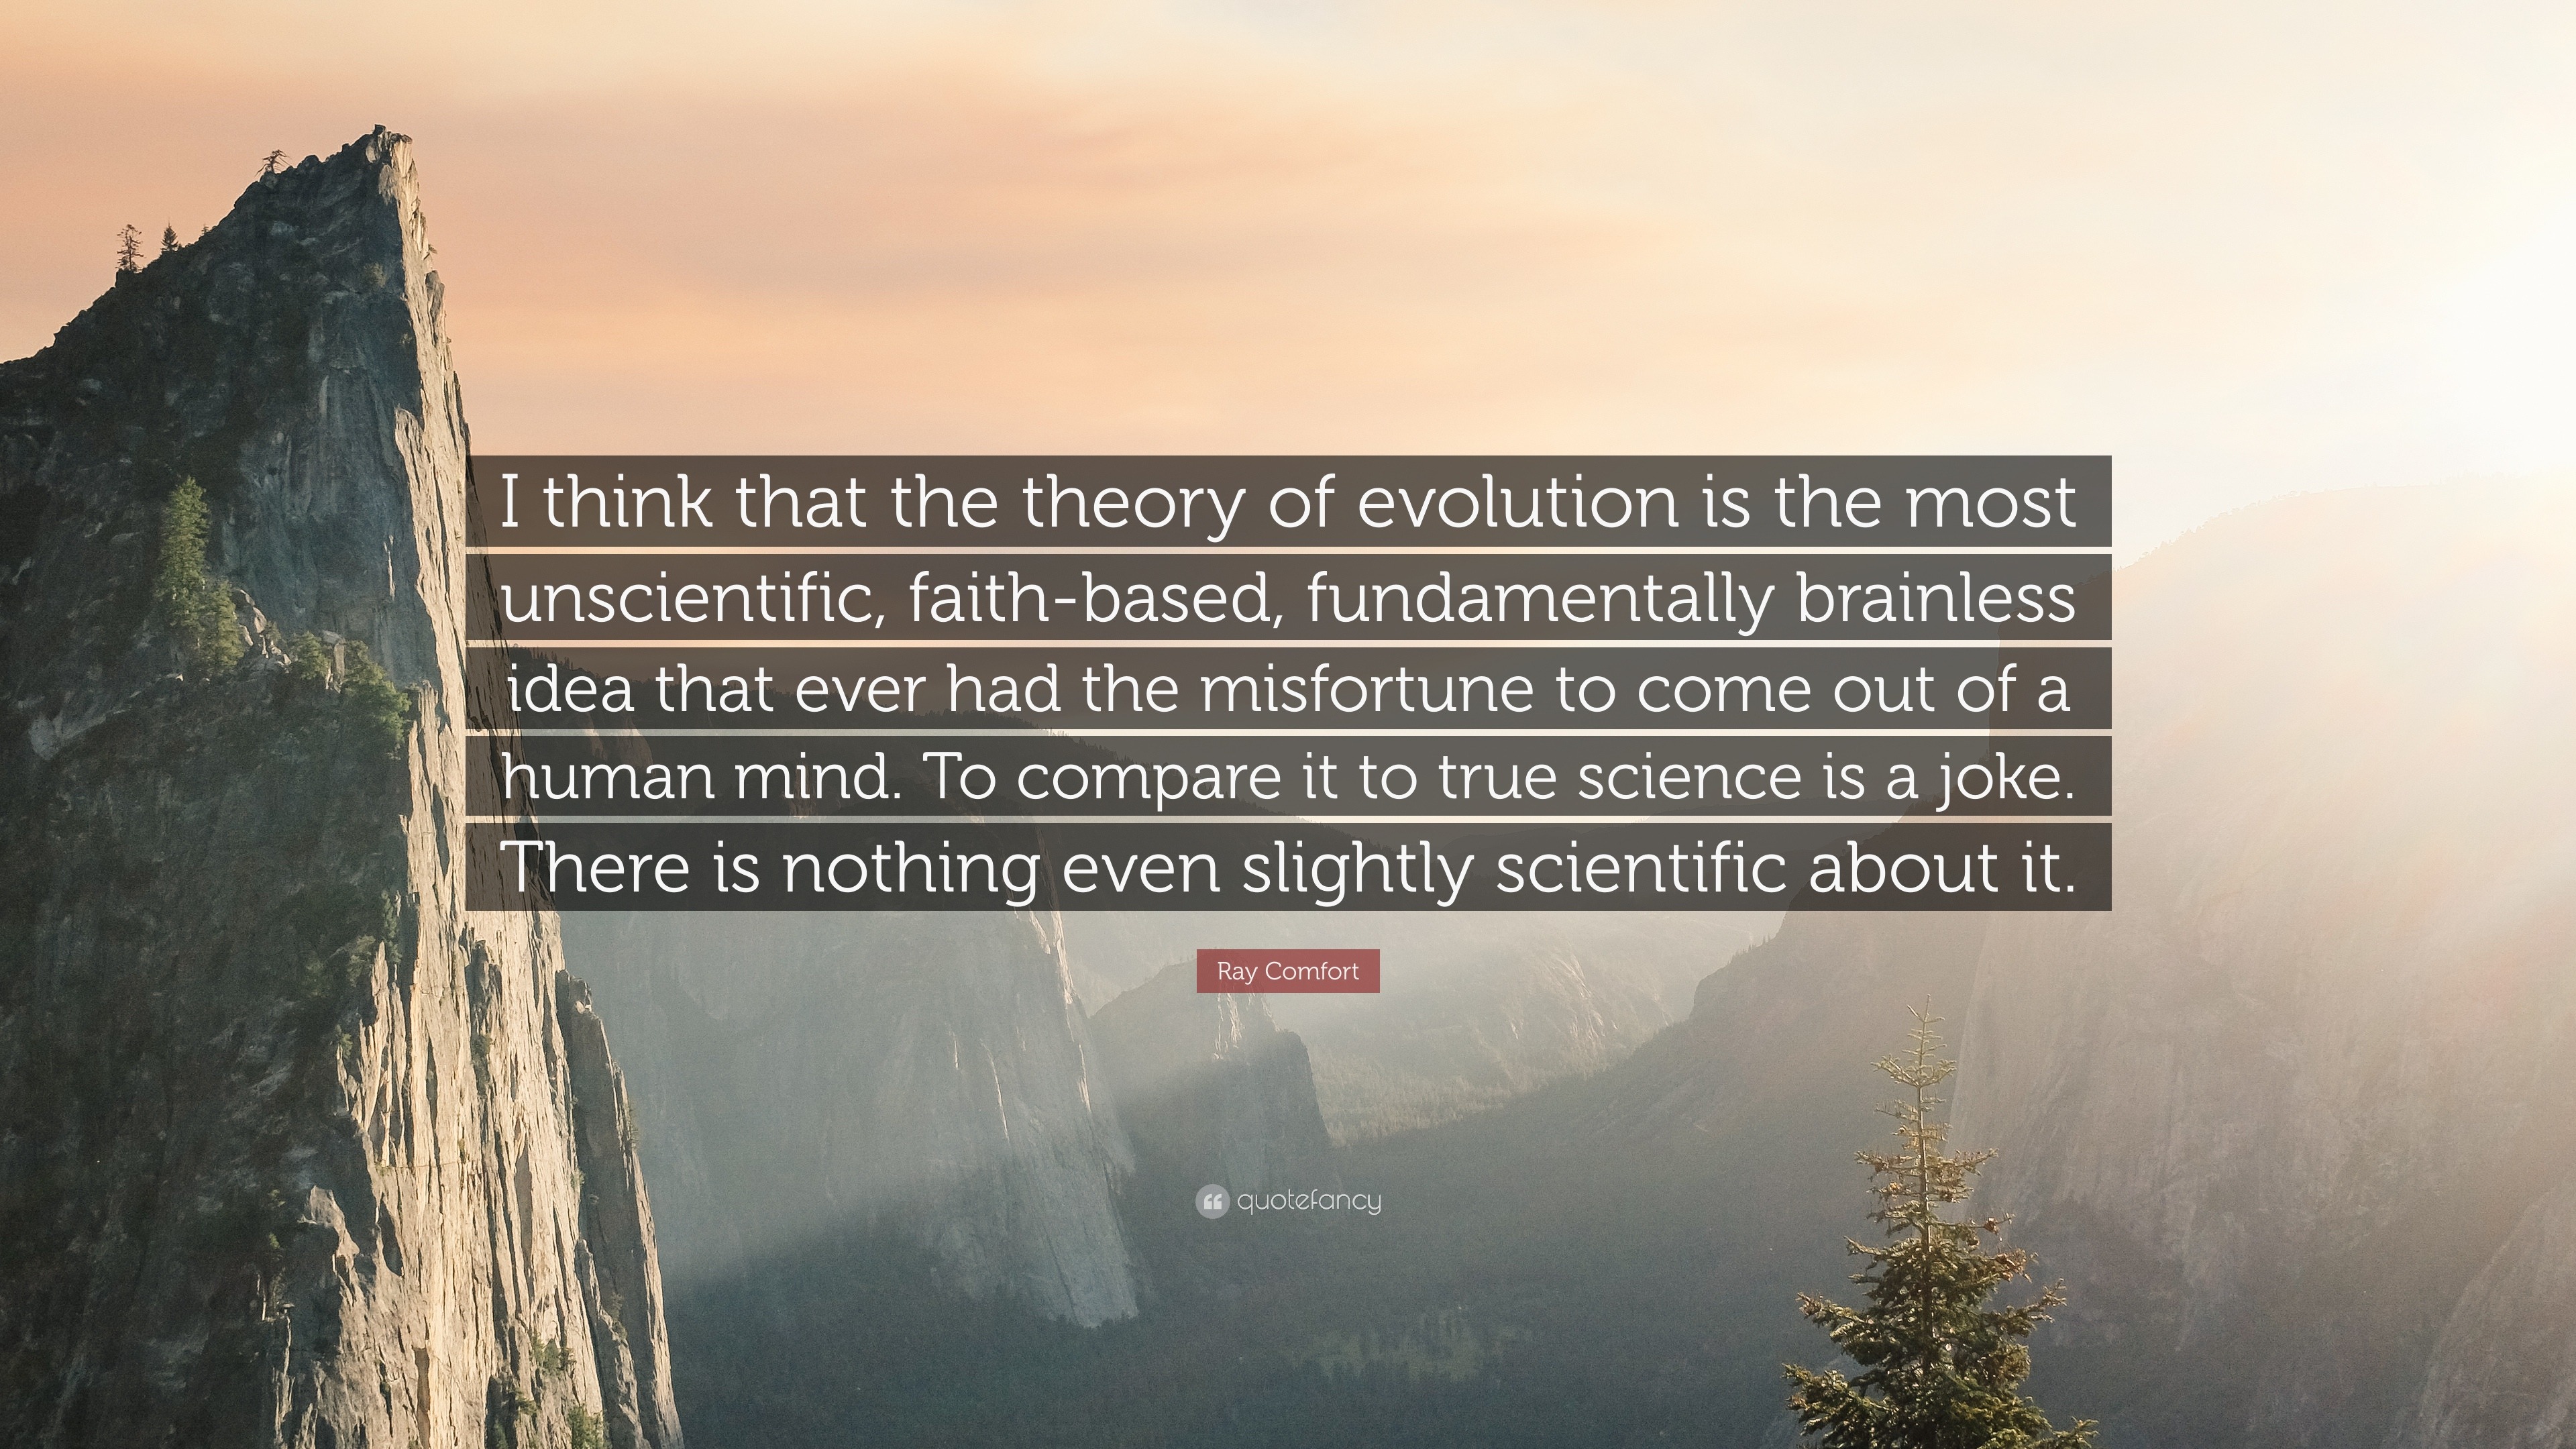 Ray Comfort Quote: “I think that the theory of evolution is the most  unscientific, faith-based, fundamentally brainless idea that ever had t”